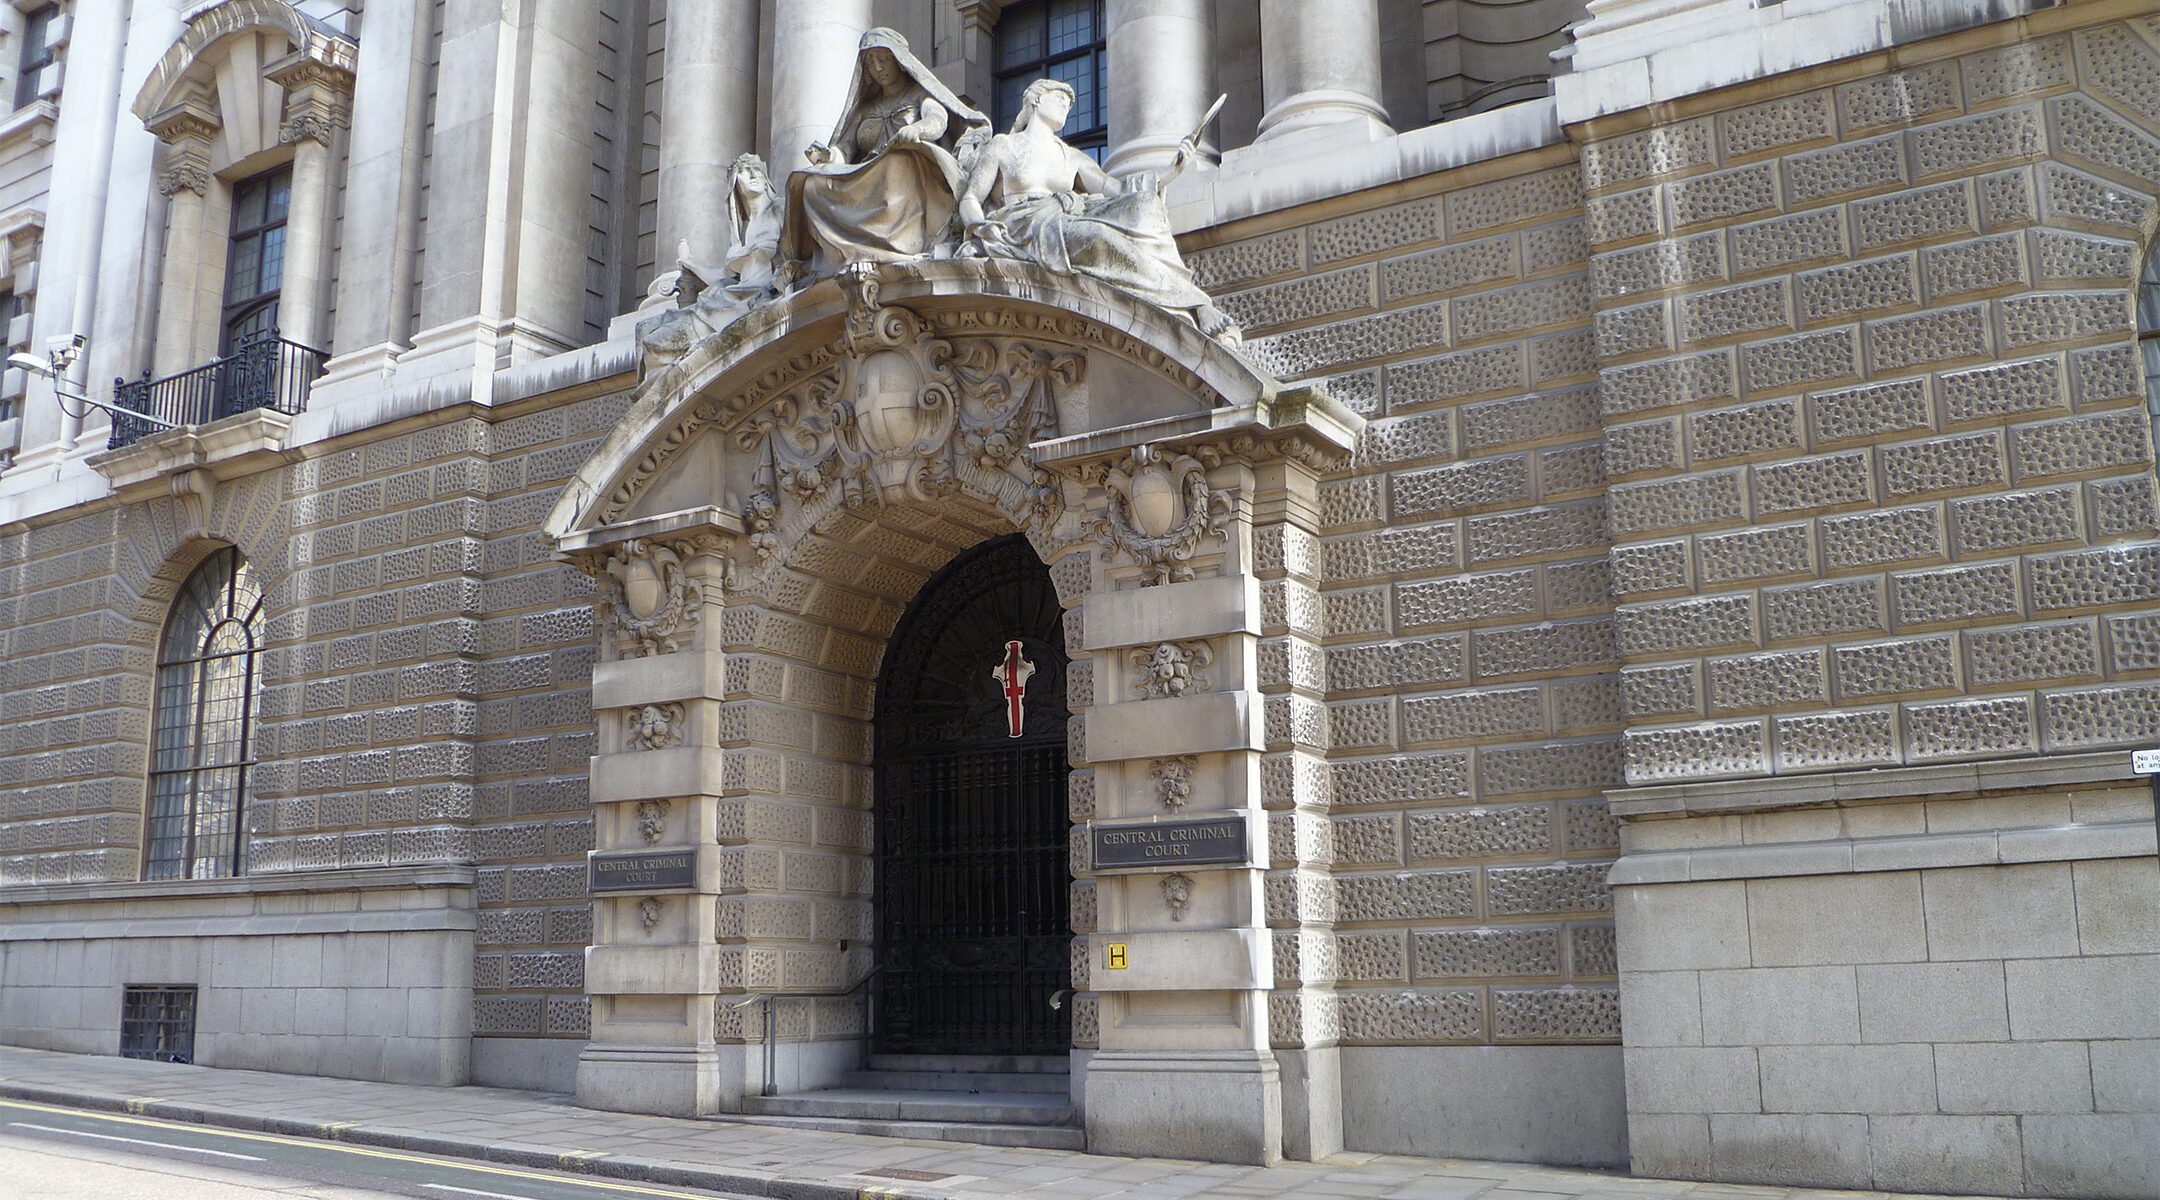 The Central Criminal Court of England and Wales in London, the United Kingdom. (Wikimedia Commons)